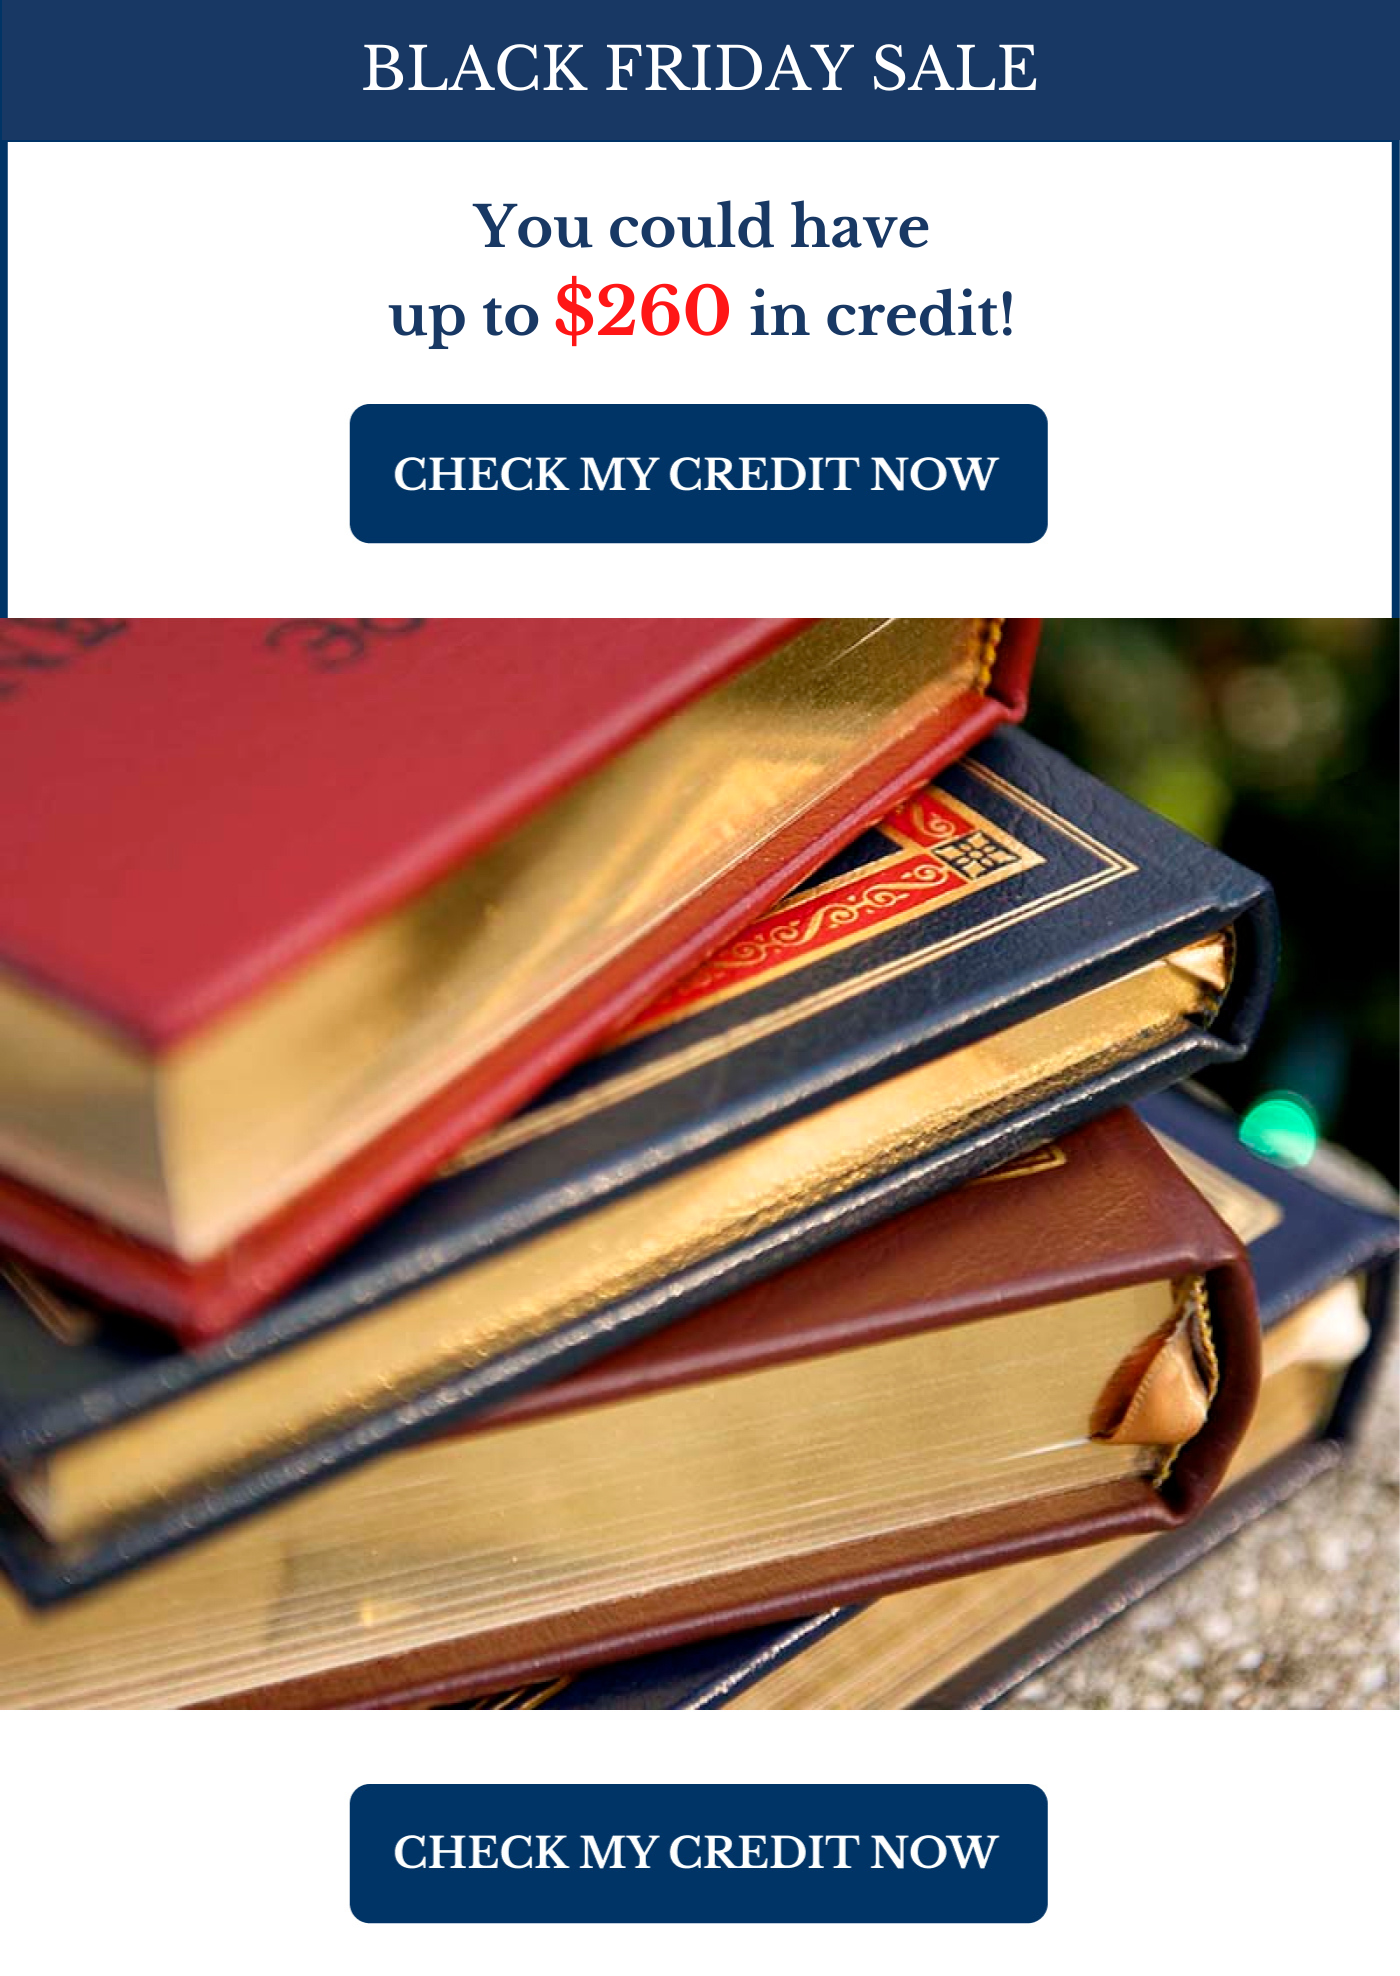 You could have up to $260 in credit!